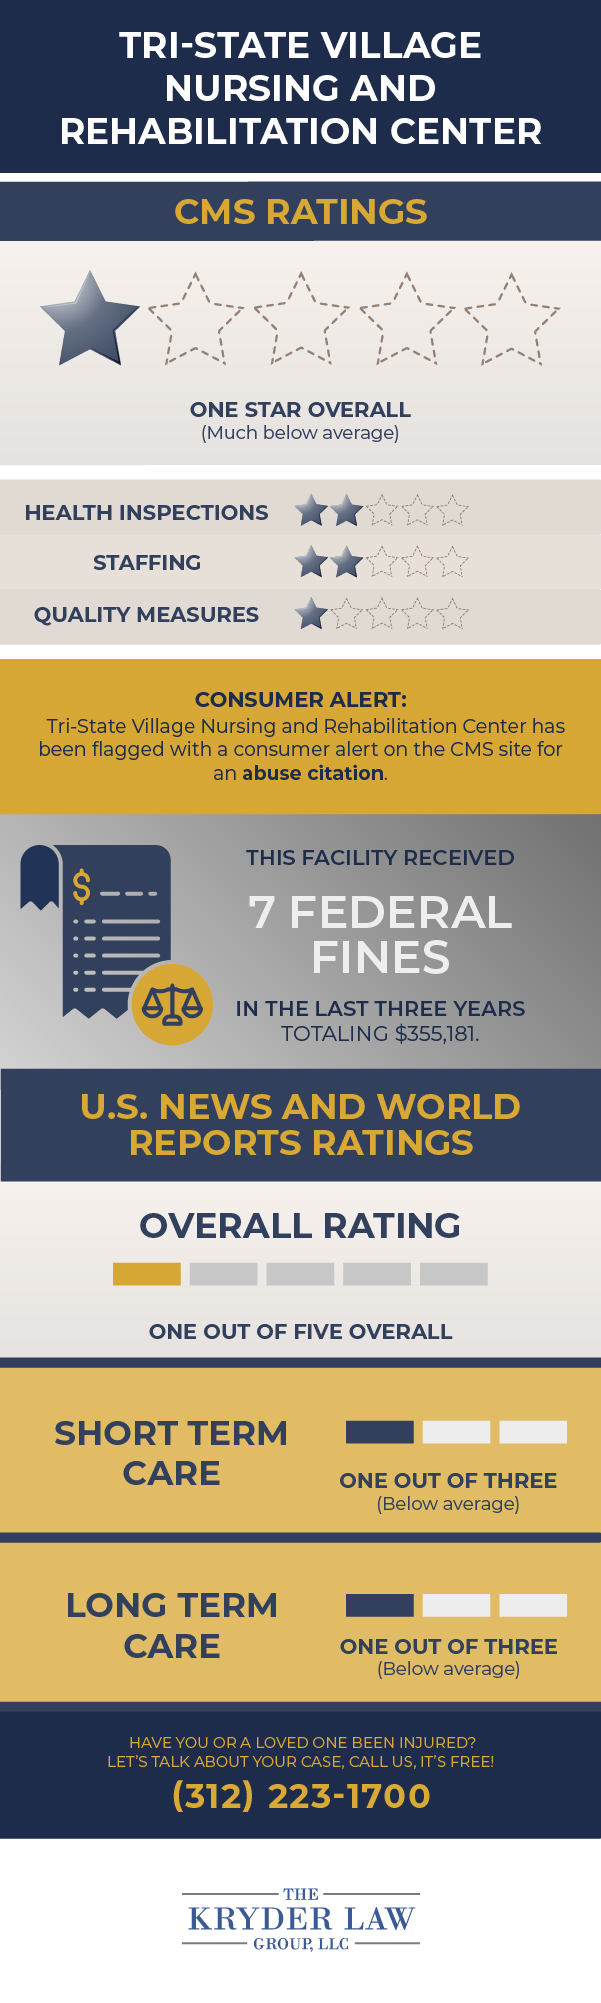 Tri-State Village Nursing and Rehabilitation Center CMS and U.S. News and World Reports Ratings